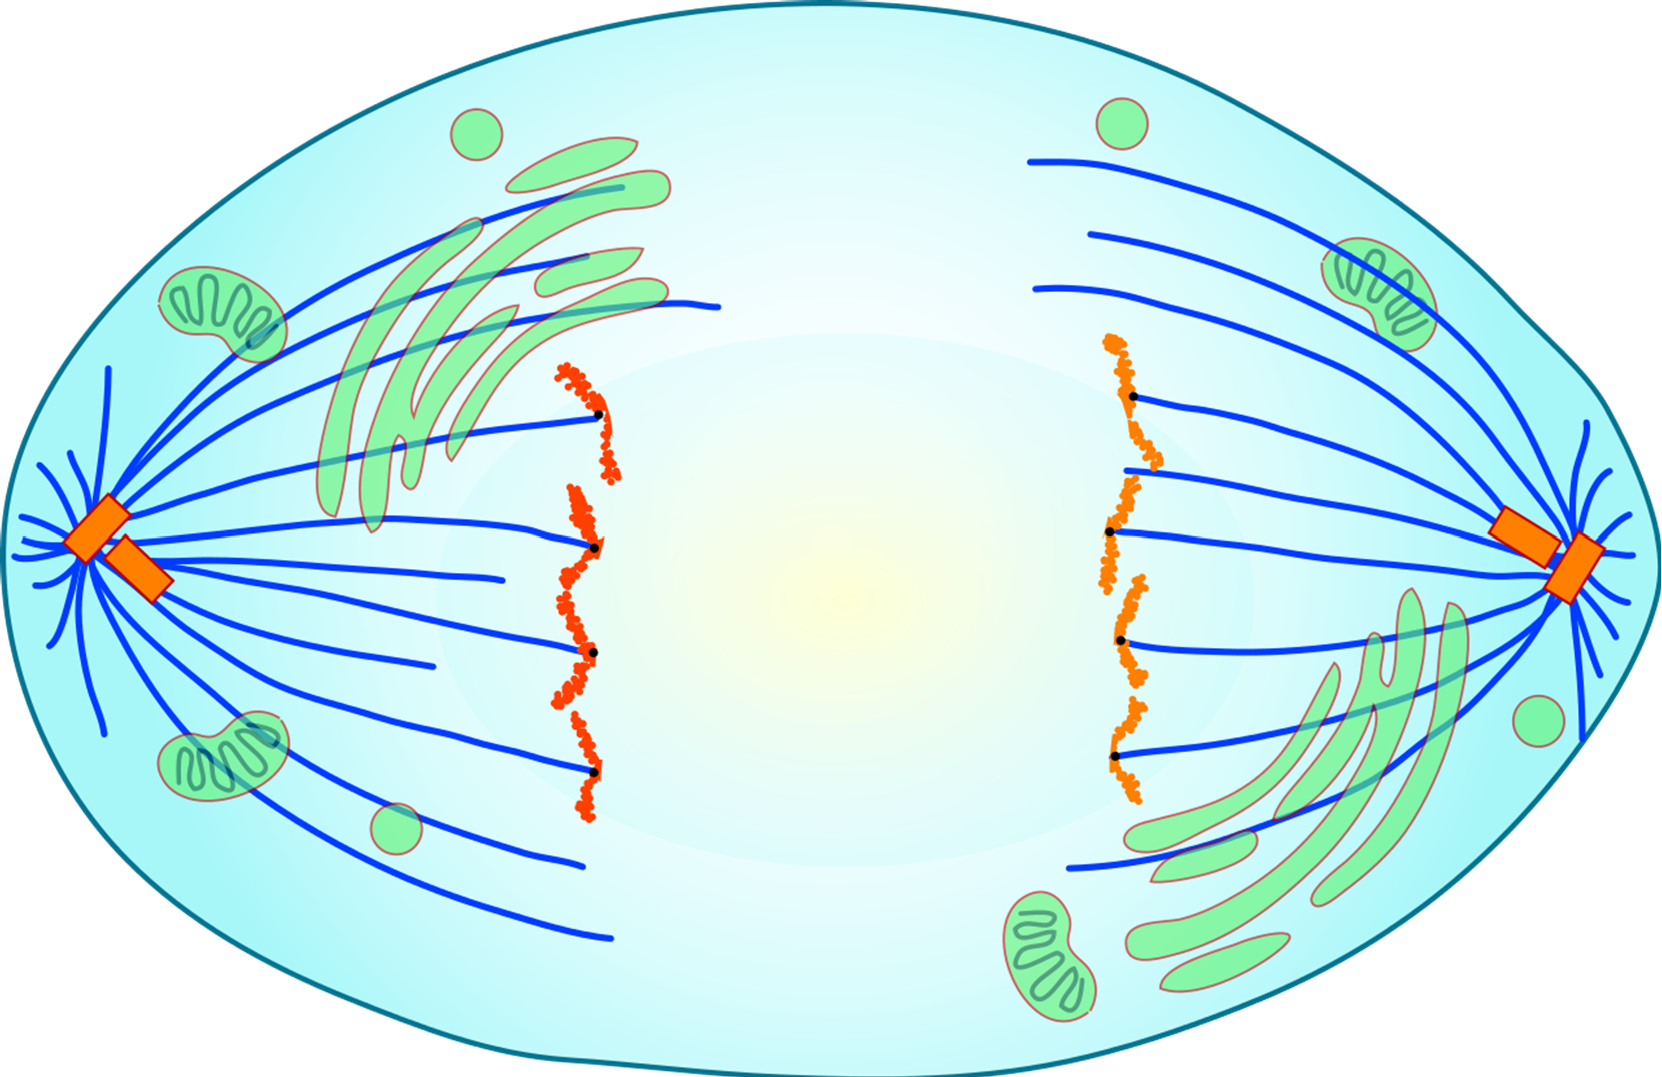 Illustration of a cell in anaphase